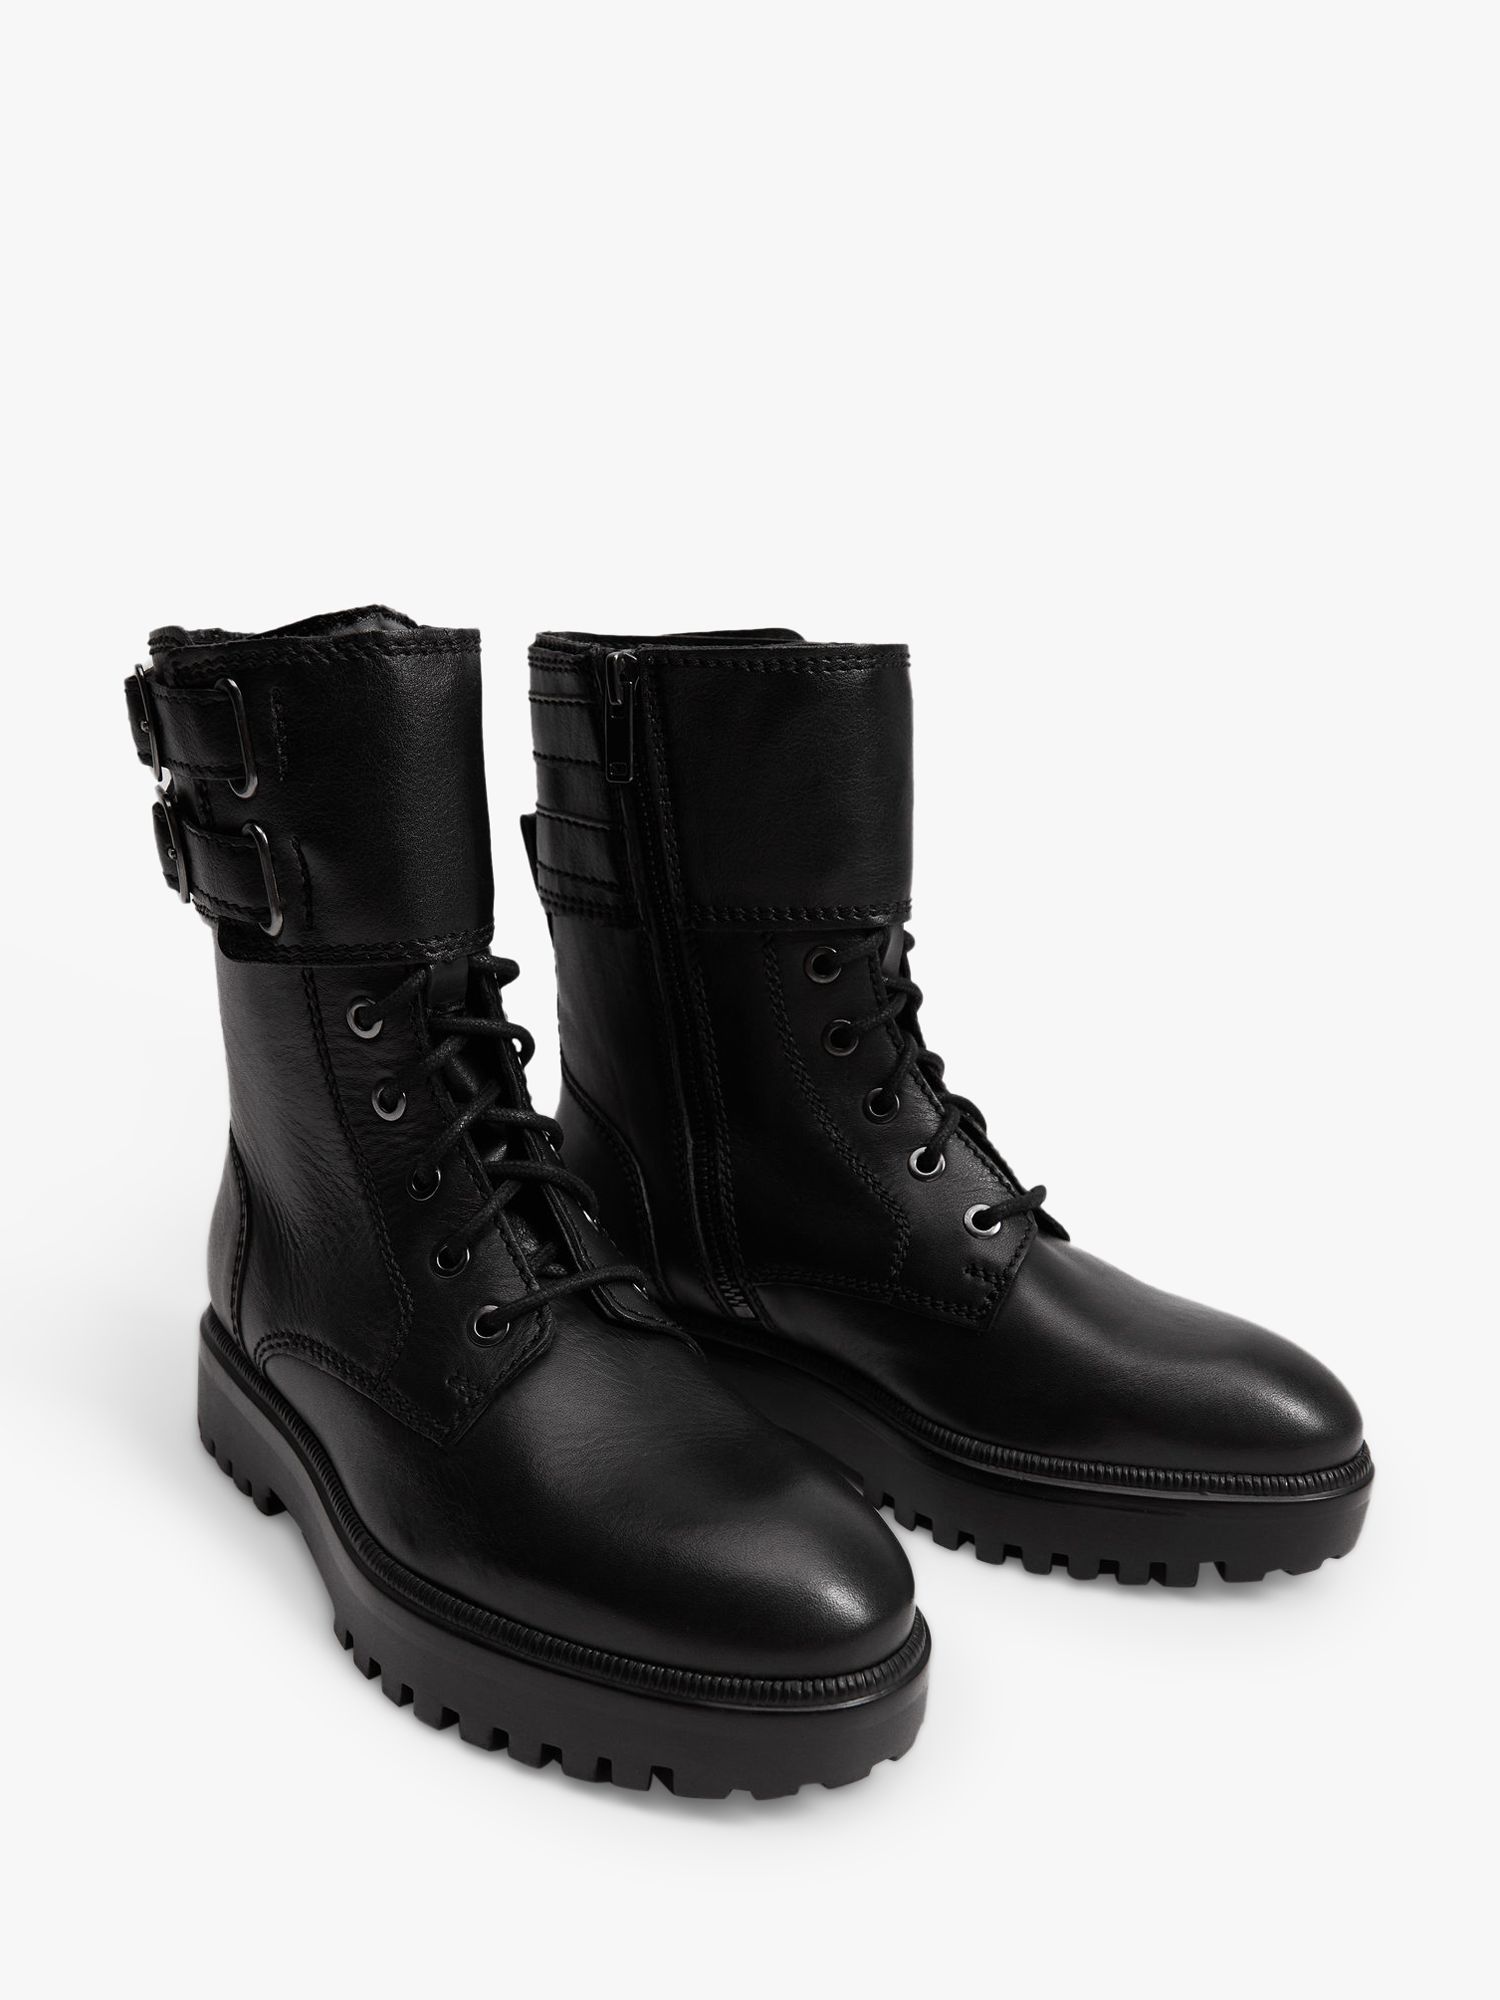 Mango Classic Leather Lace Up Mid Height Biker Boots, Black at John ...